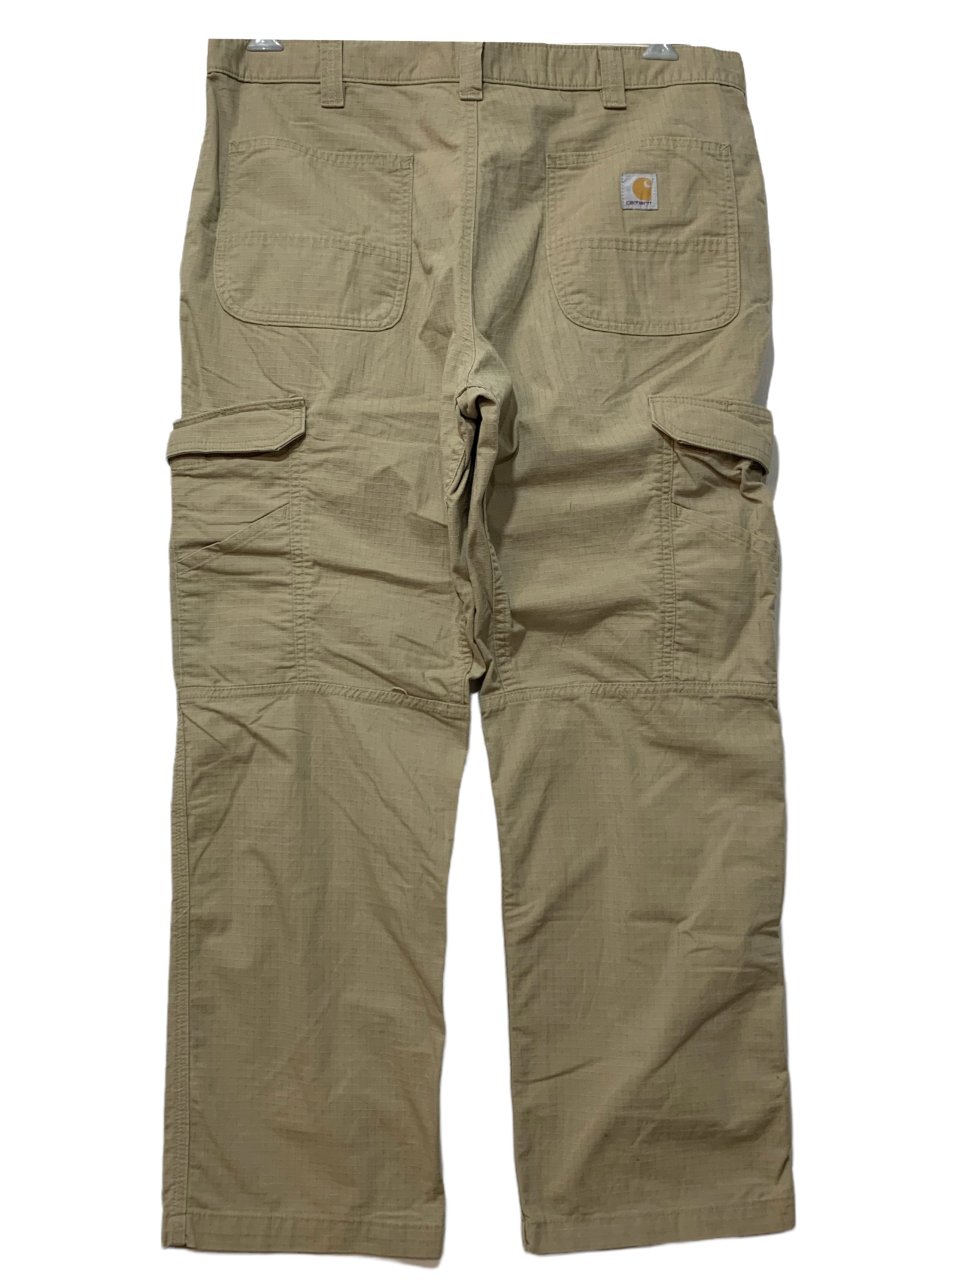 00s Carhartt Force Relaxed Fit Work Pants カーキ W38×L30 